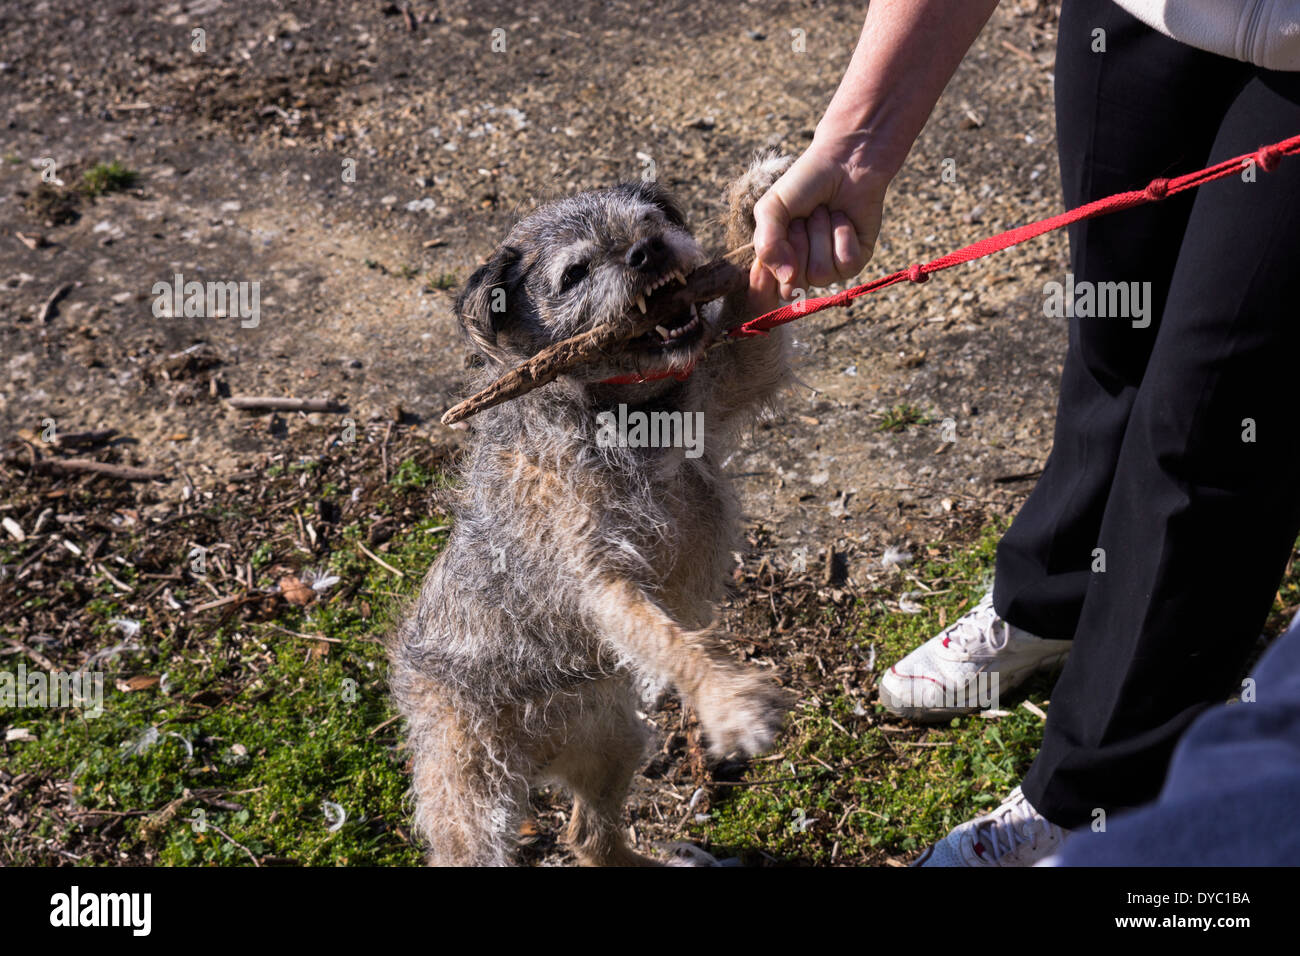 BORDER TERRIER DOG CANINE OUTSIDE PLAYING HOLDING A BIG STICK AND OFFING IT PAW TO HOLD WHY ON A LEASH CHEWING HIS WOODEN STICK Stock Photo